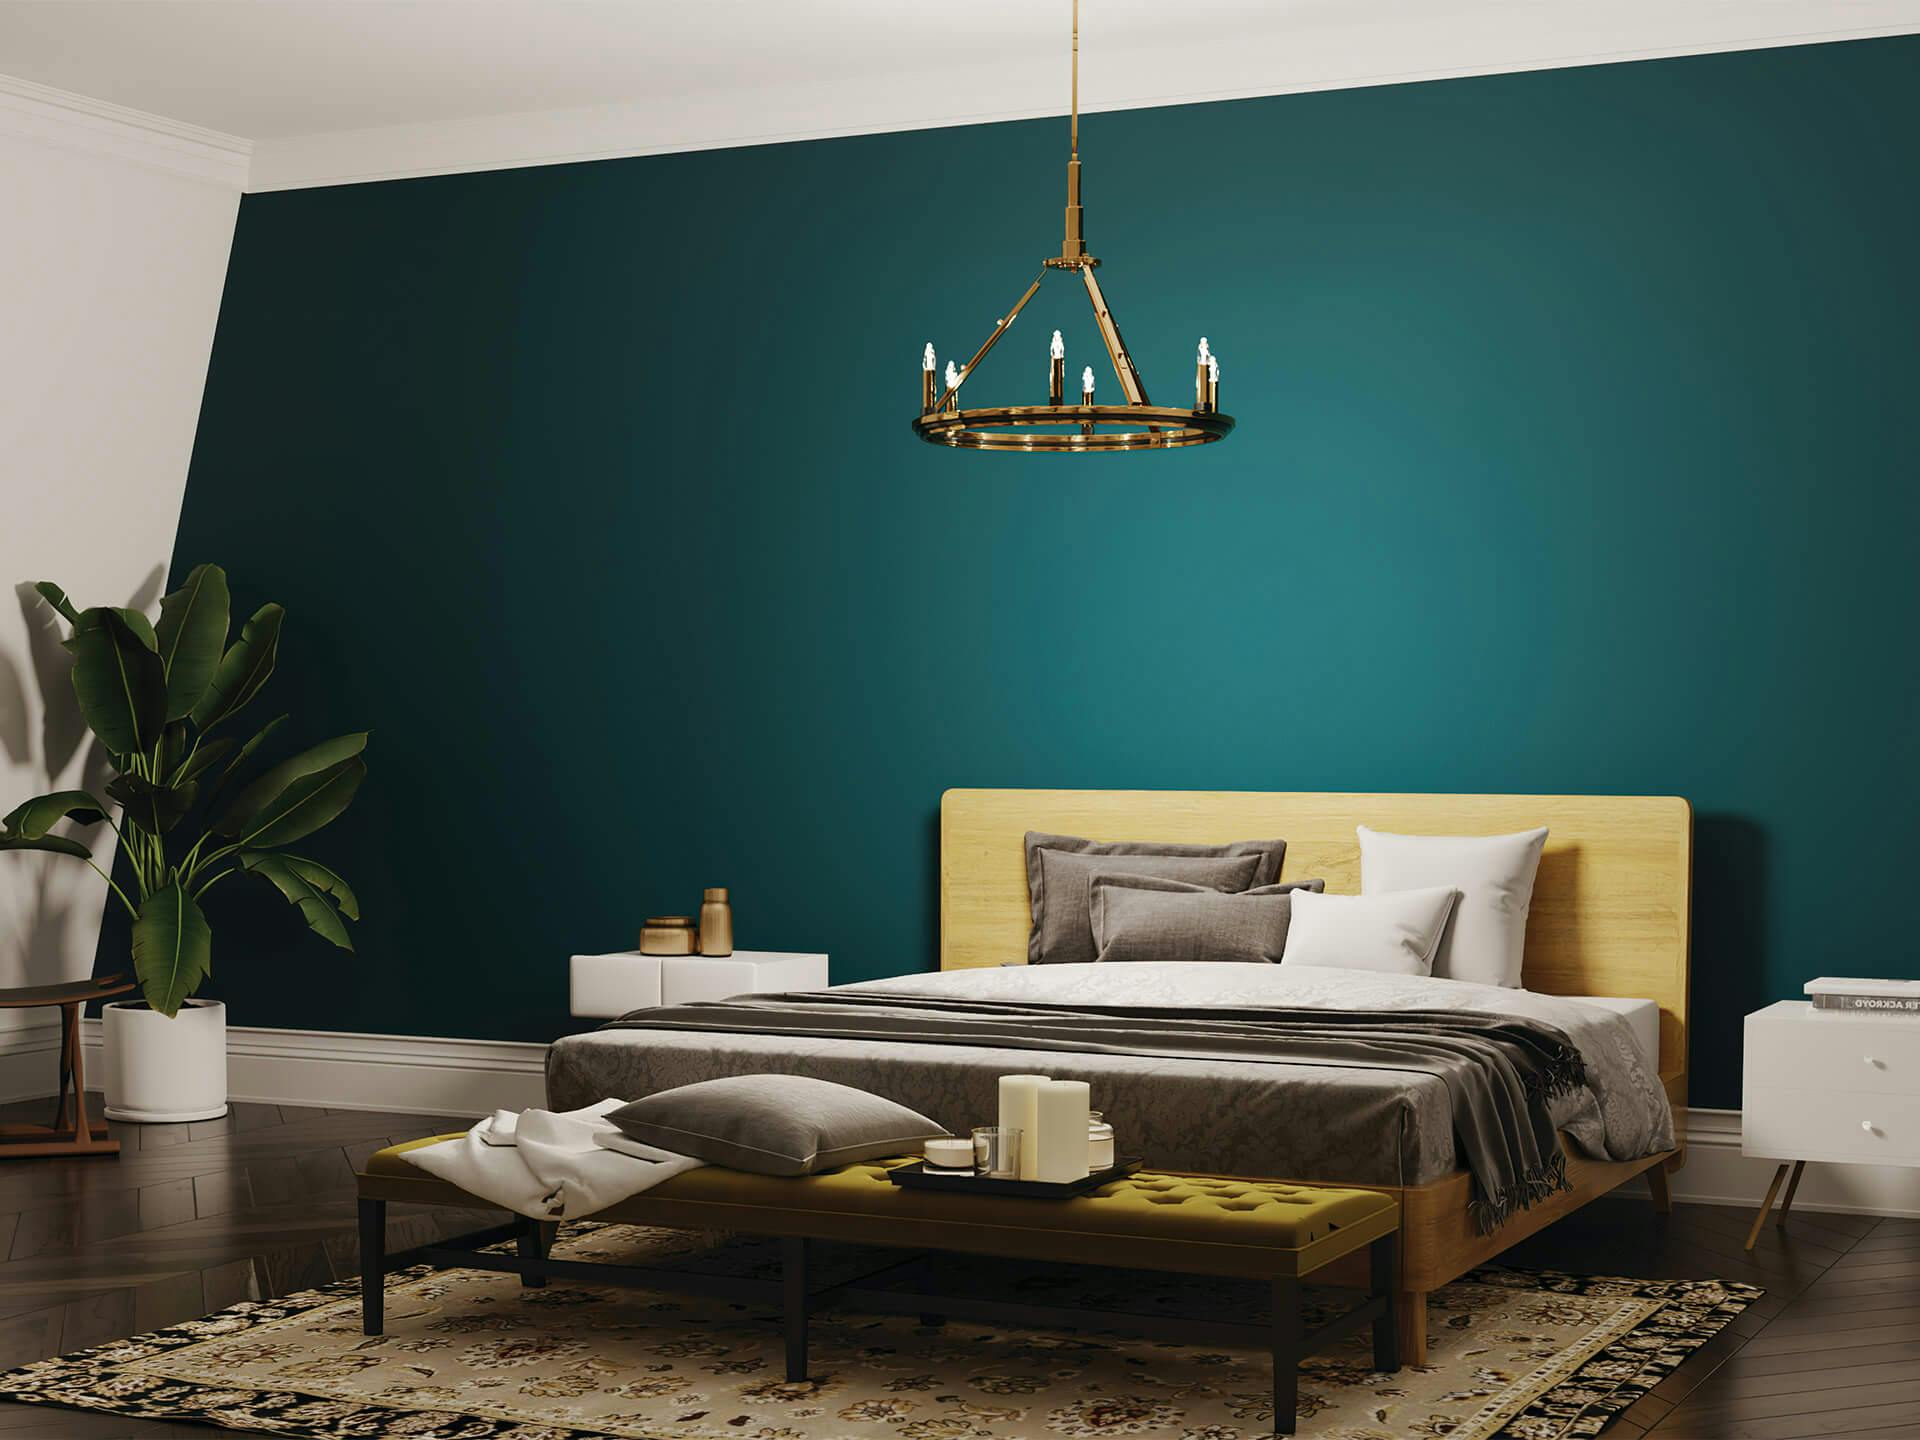 Bedroom with a green accent wall behind the bed with a Emmala chandelier hanging above